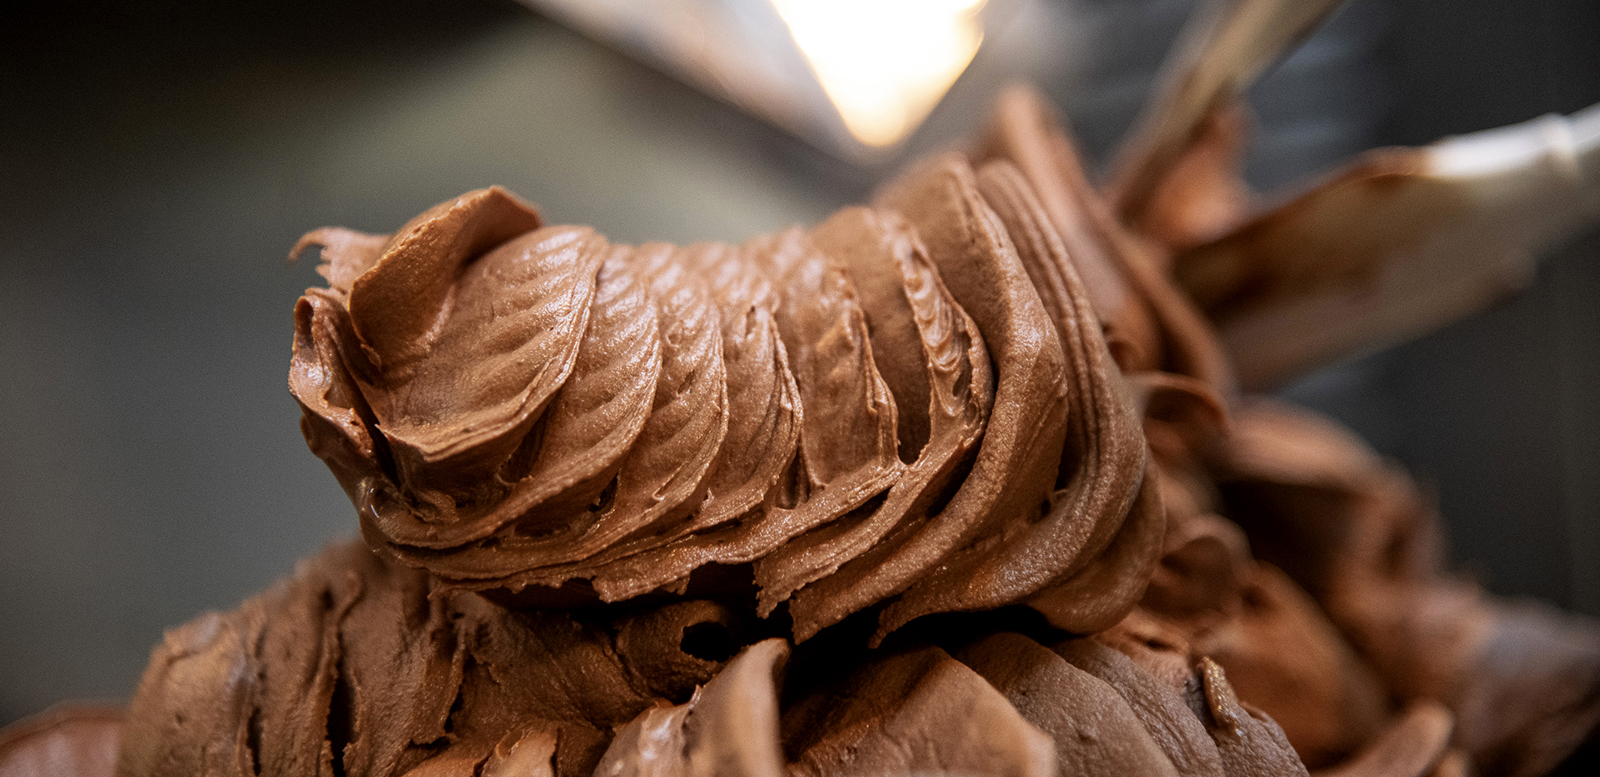 Our Partners talking about us: Amedei & Artico for the best Traditional Chocolate Ice Cream